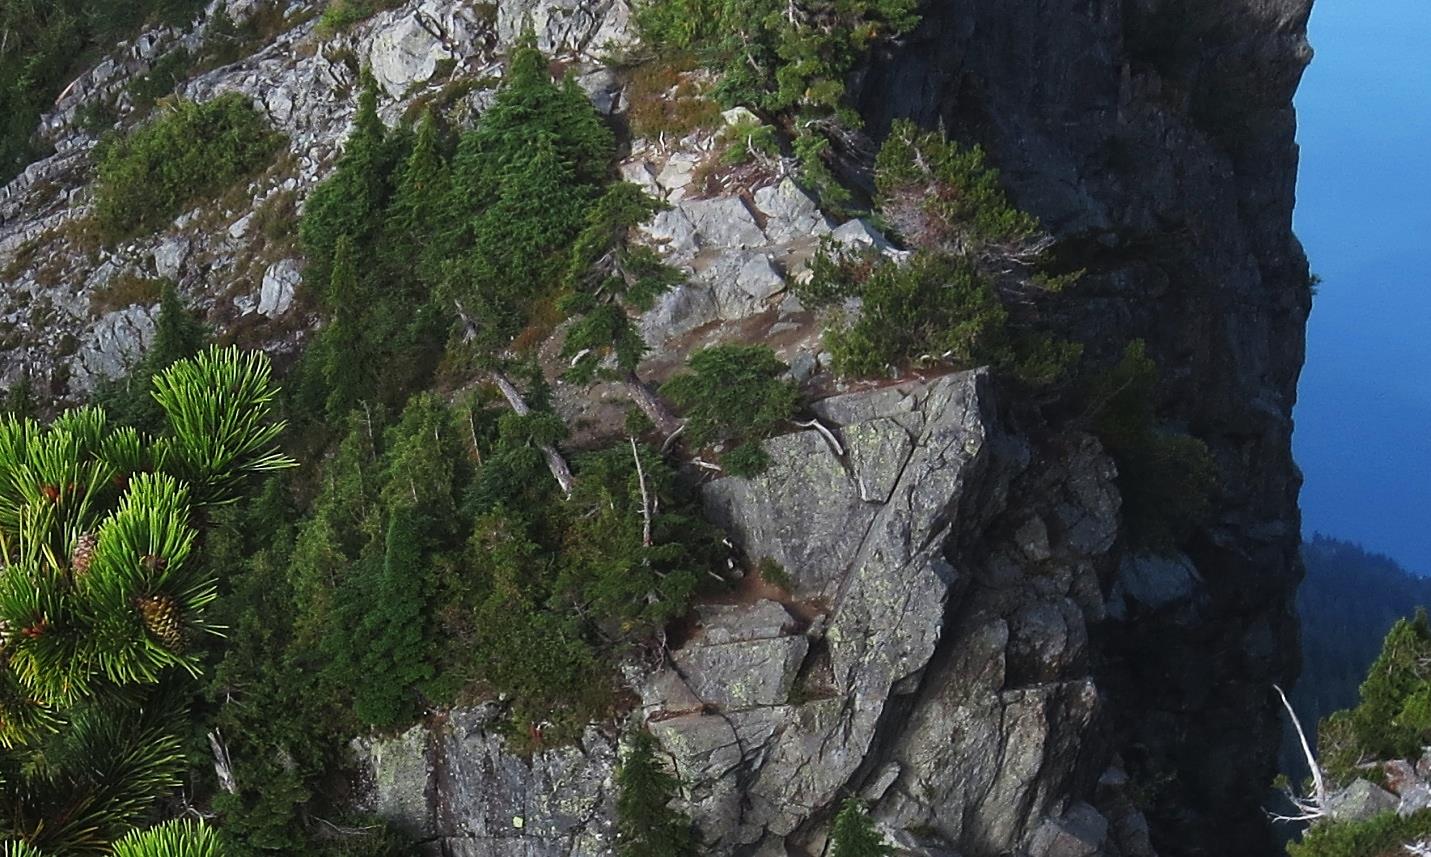 Photograph of Conifers growing on granitic rocks at The Lions, near to Vancouver BC